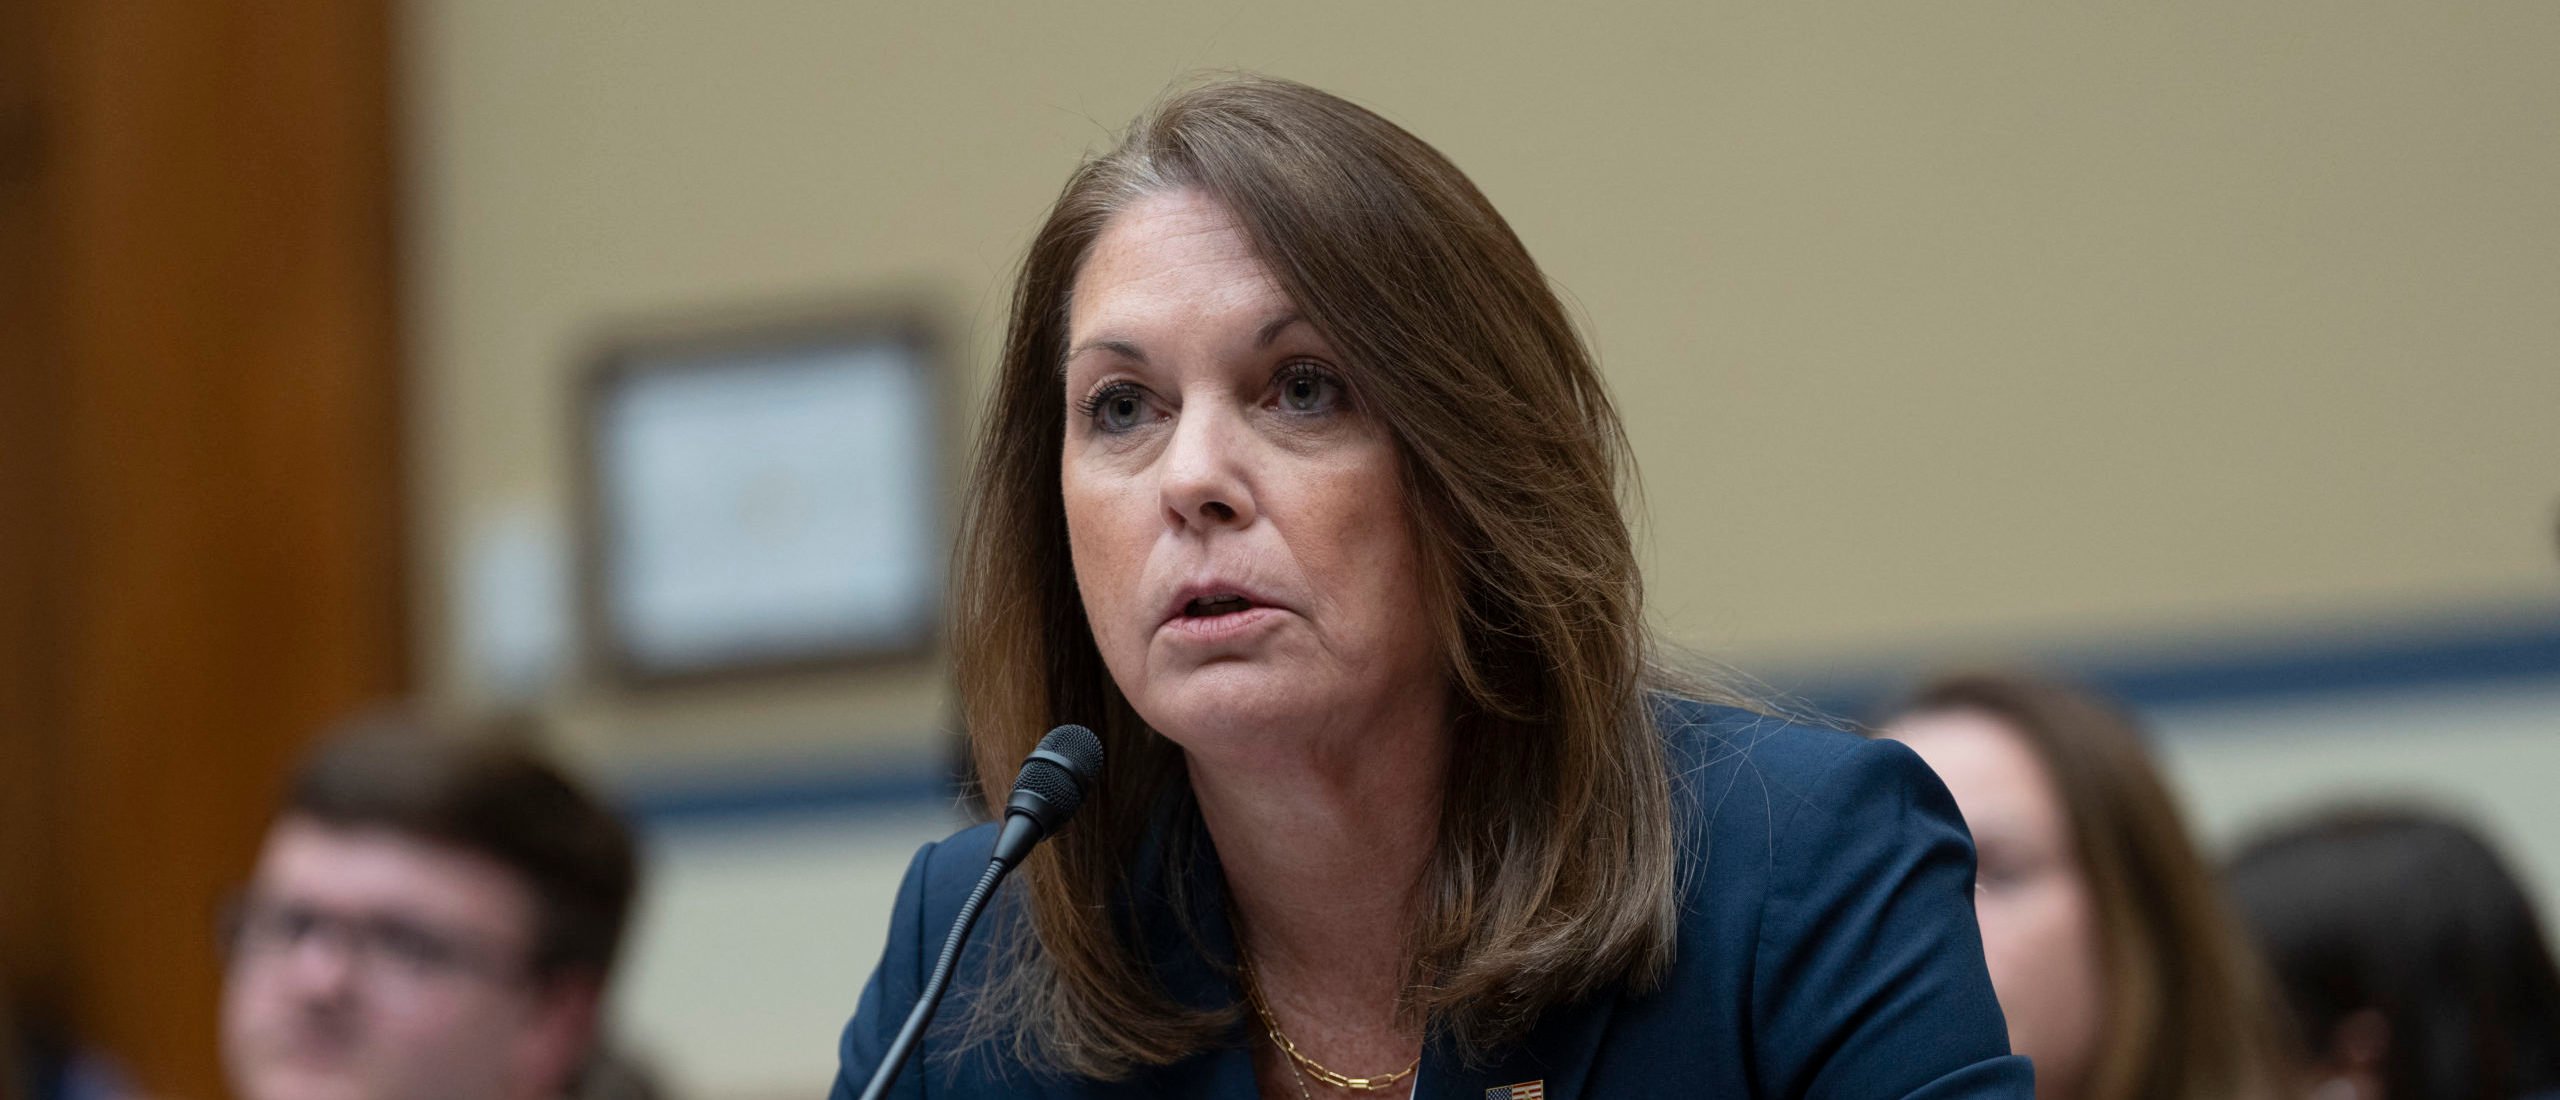 US Secret Service Director Kimberly Cheatle testifies during a House Oversight Committee hearing examining potential security failures surrounding the attempted assassination on former US President Donald Trump, on Capitol Hill in Washington, DC, July 22, 2024. The Secret Service has faced intense scrutiny since the July 13 shooting in Butler, Pennsylvania, during which a gunman opened fire on the Republican presidential candidate from an exposed rooftop some 150 yards (meters) away from the stage where Trump was speaking. (Photo by Chris Kleponis / AFP) (Photo by CHRIS KLEPONIS/AFP via Getty Images)